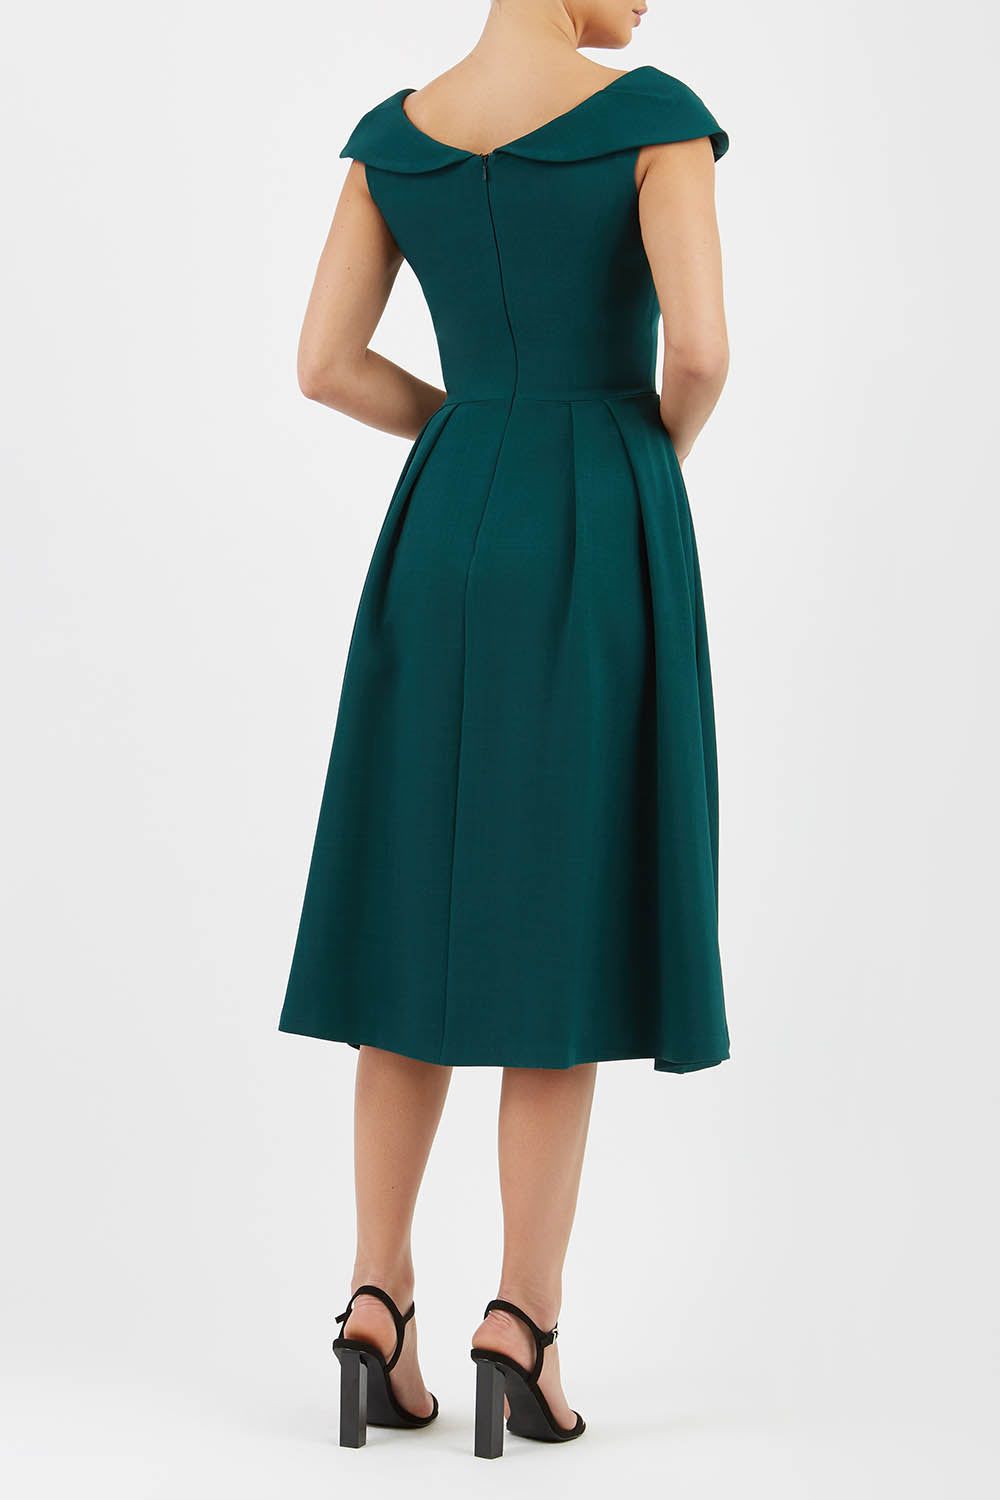 Model wearing the Diva Chesterton Sleeveless dress with oversized collar detail and swing pleated skirt in forest green back image